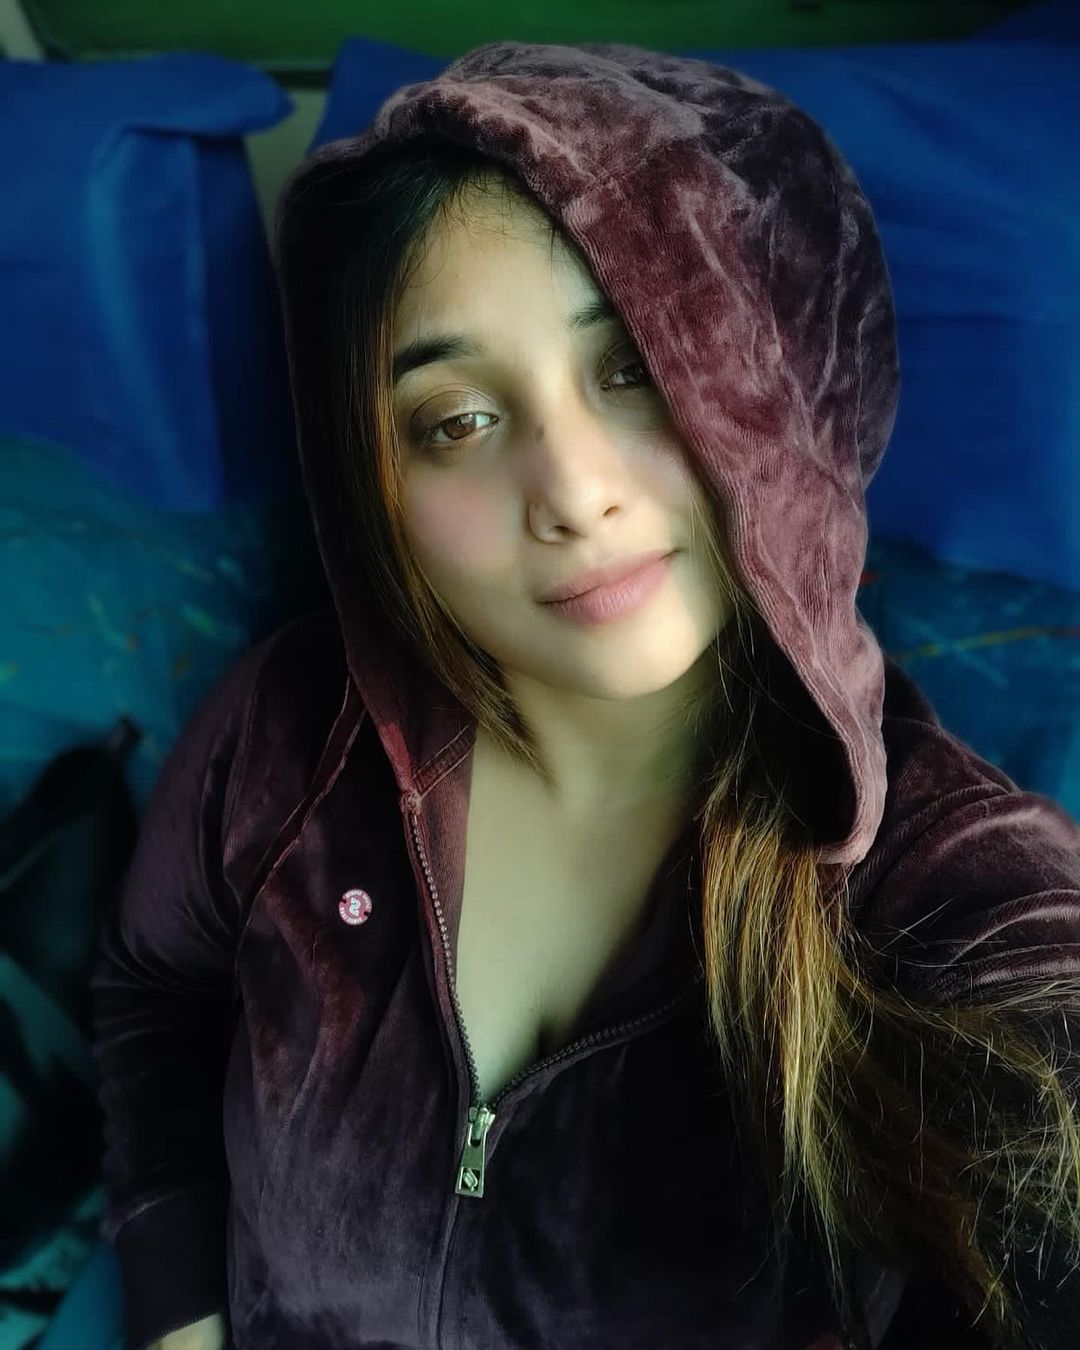 Rani Chatterjee shares her glamorous beauty during train journey, see photos 6261